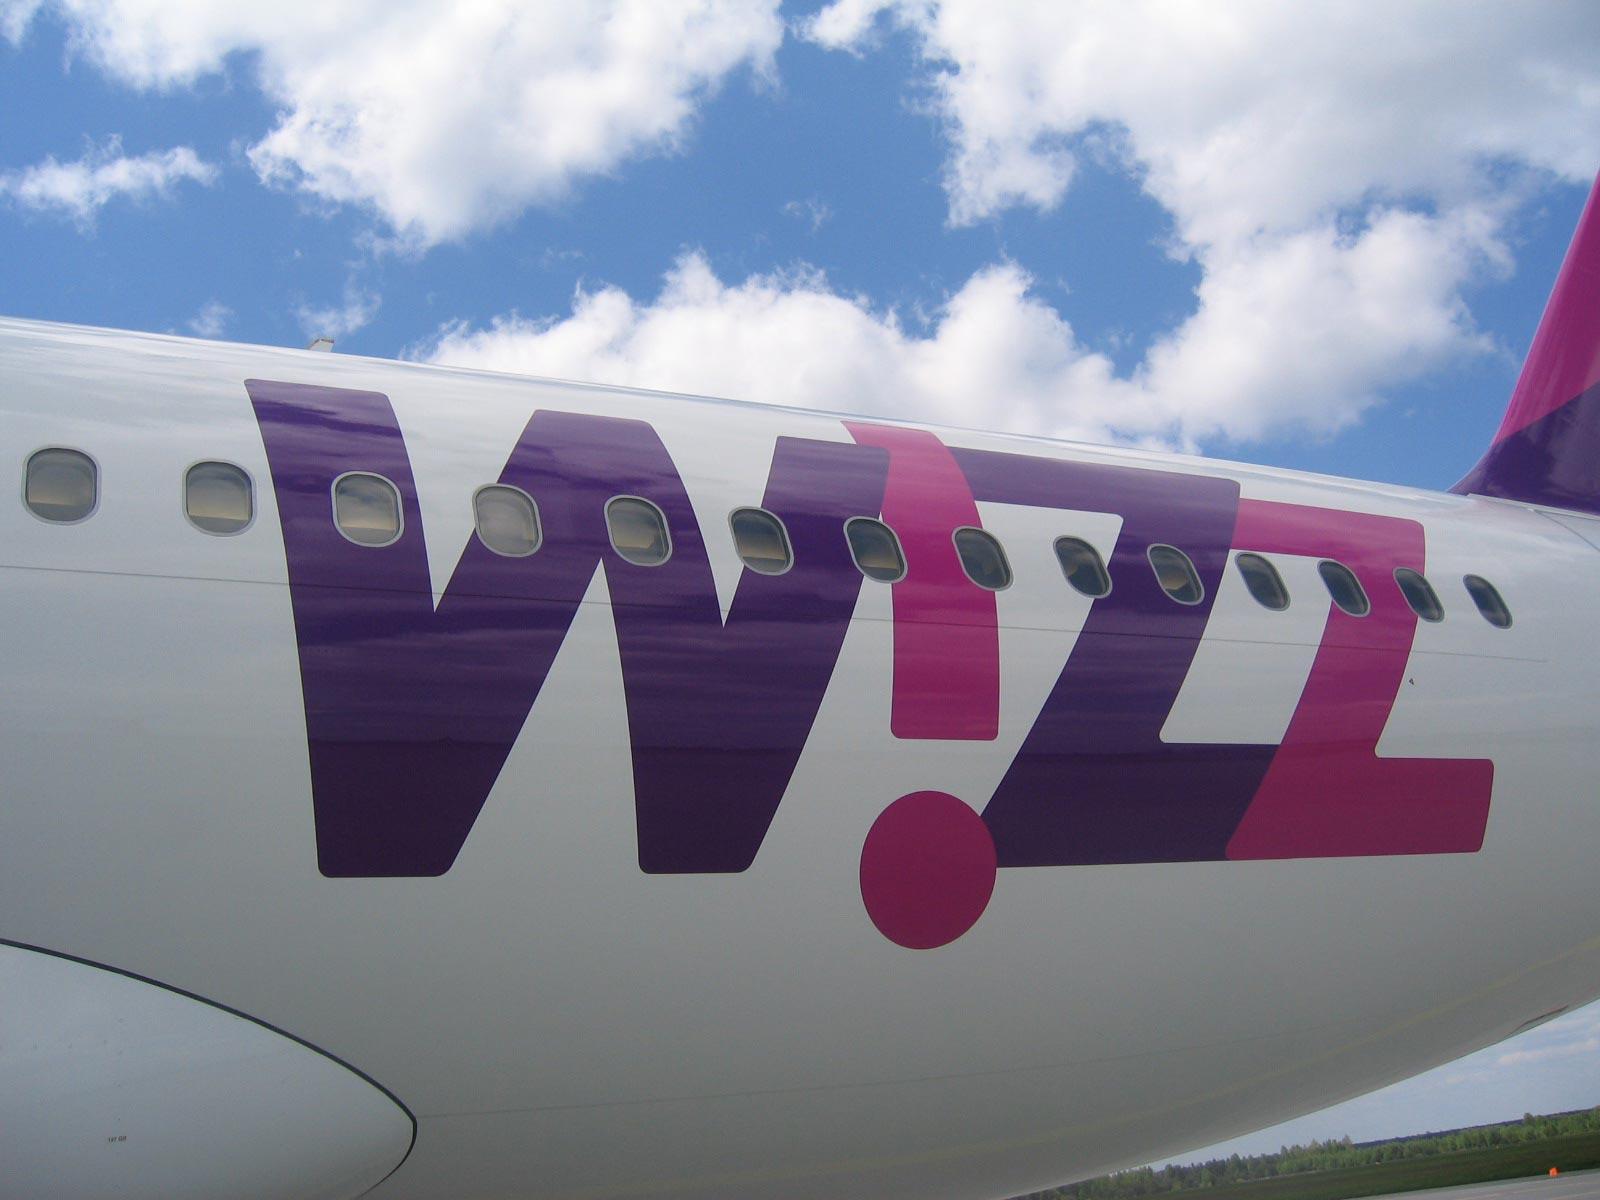 New Budapest - Moscow Route From September With Wizz Air